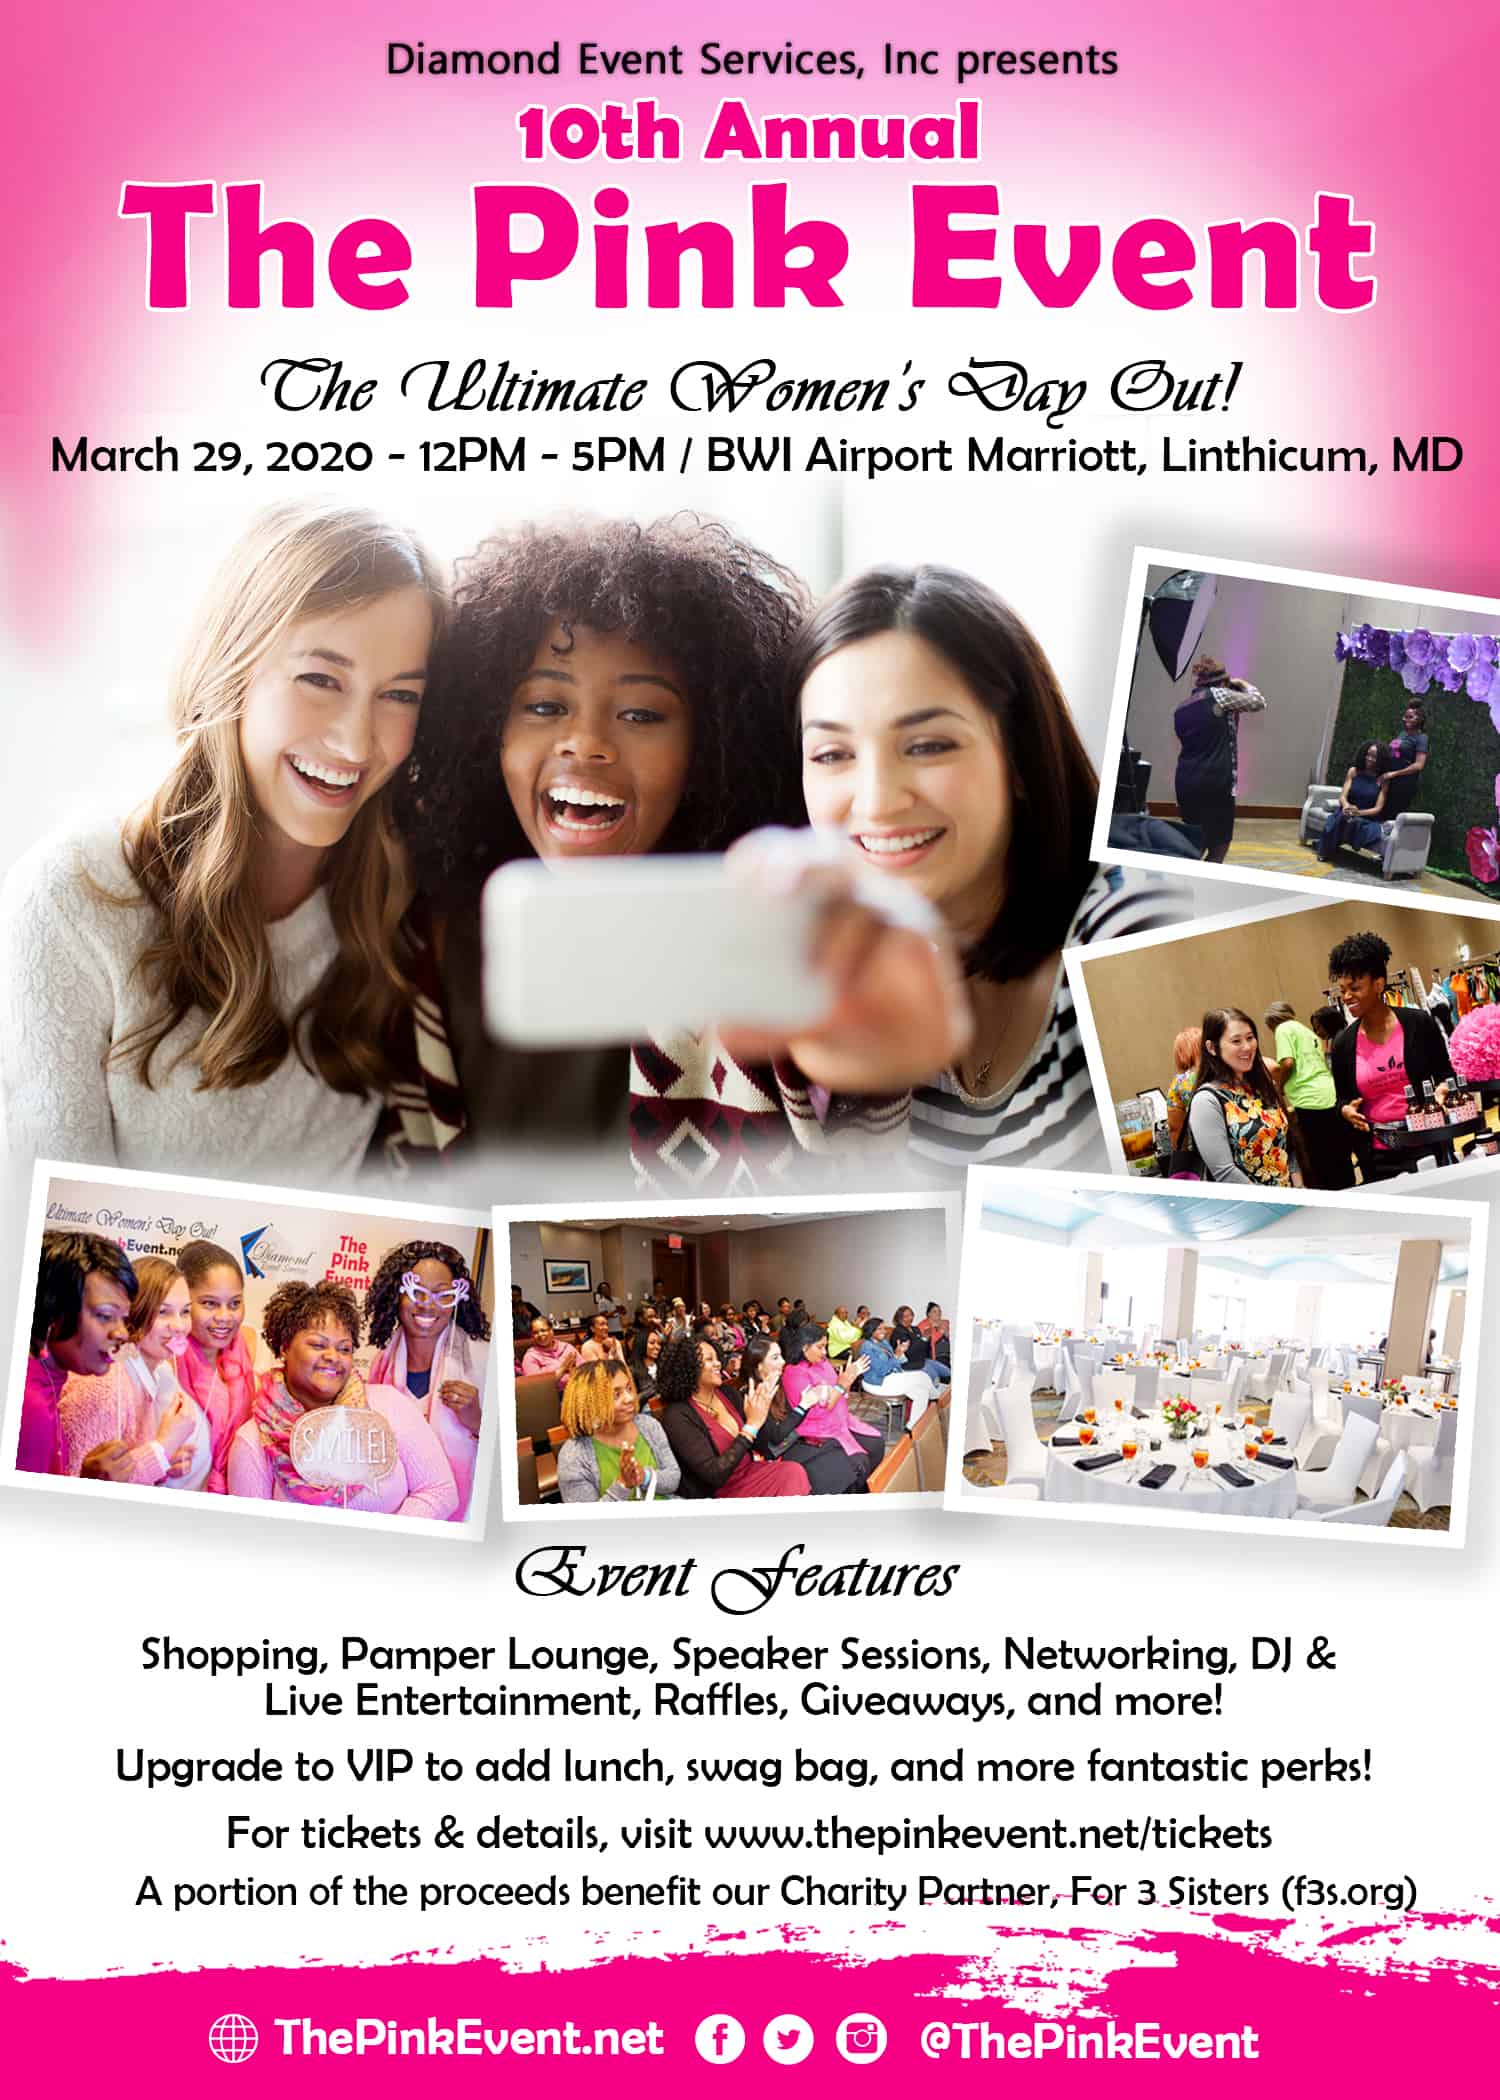 10th annual, The Pink Event Ultimate Women's Day Out HerMind